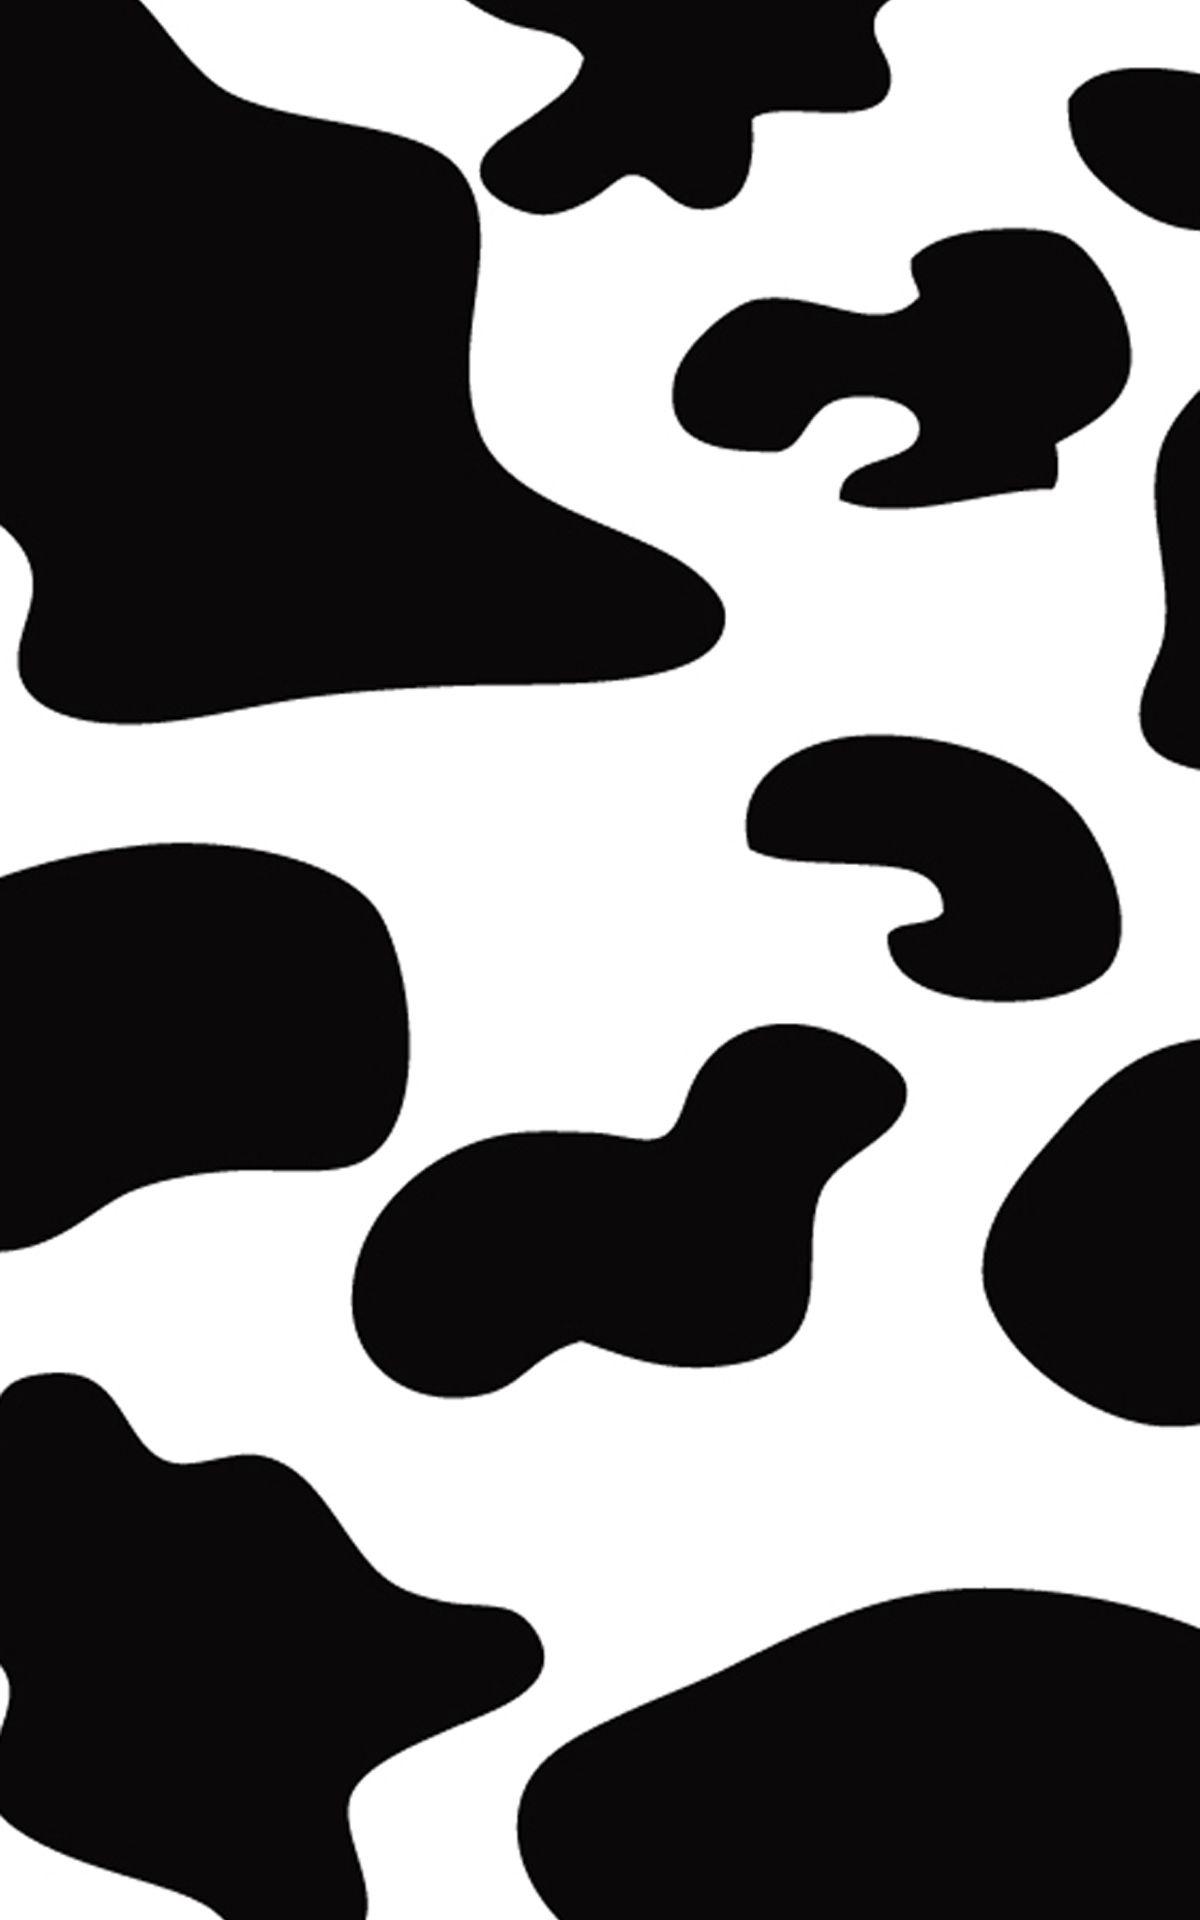 Cow Aesthetic Wallpapers - Wallpaper Cave